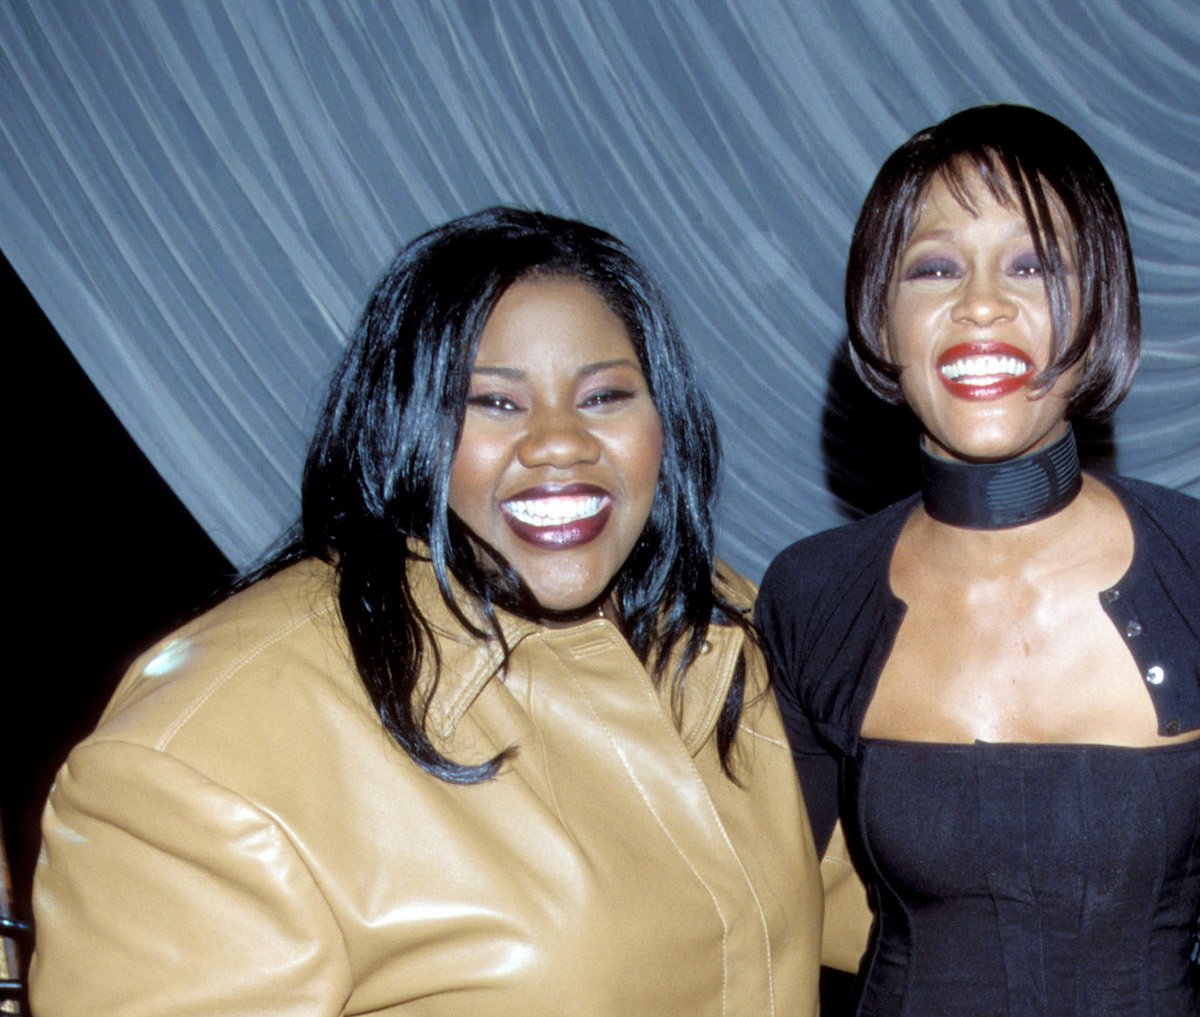 Kelly Price wearing a tan leather jacket and Whitney Houston wearing a black dress pose for photo.